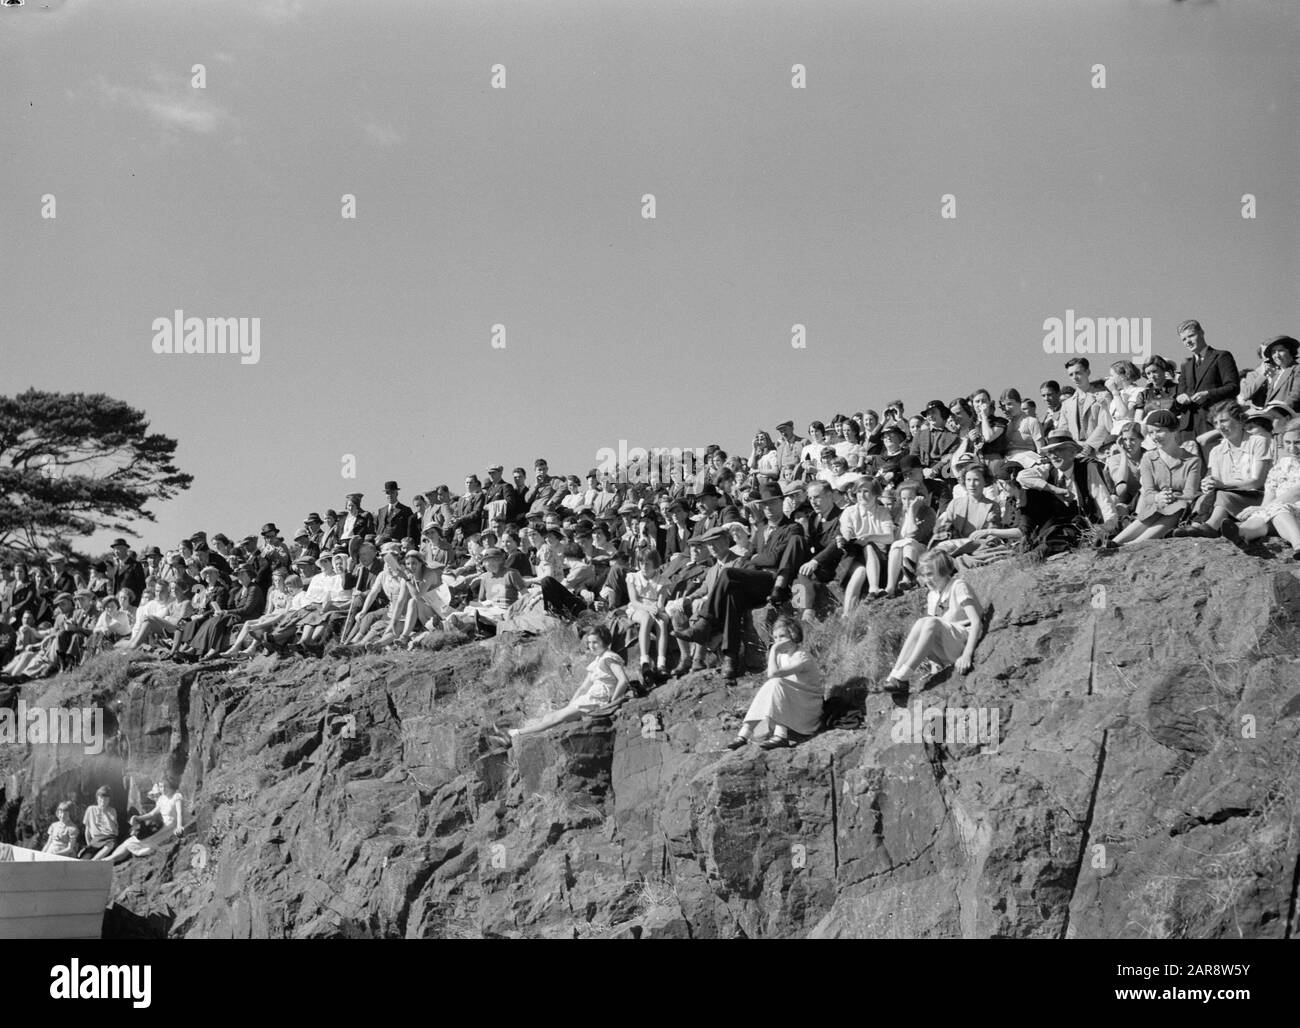 Scotland - The Highlands  Spectators at the Highland Games, a nineteenth century continuation of traditional clan games from the Highlands of Scotland Date: 1934 Location: Great Britain Keywords: public, rocks Stock Photo